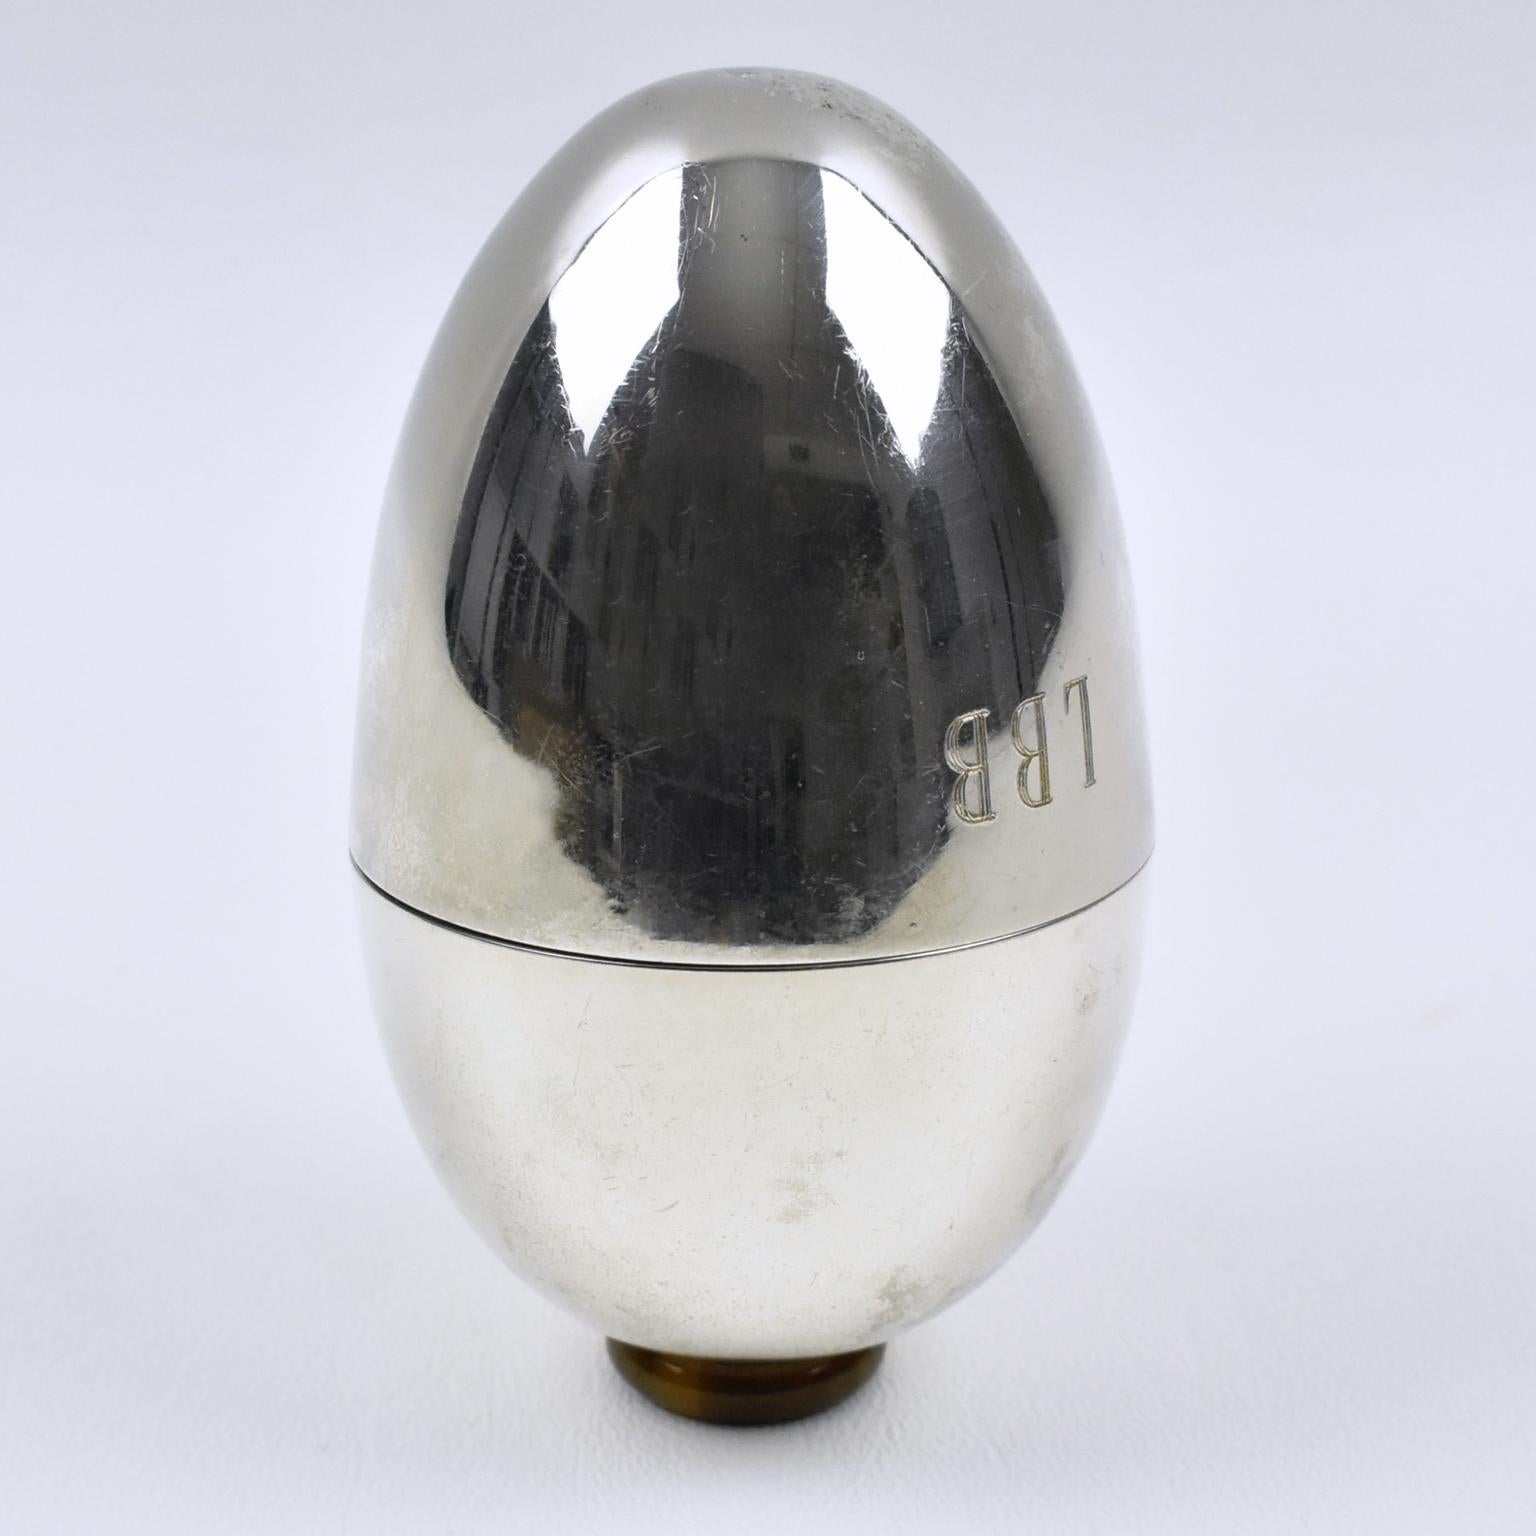 Italian designer Gabriella Crespi (1922 - 2017) created this exquisite silver plate sewing box in the 1970s. The streamlined egg-shaped opens in two with an almost complete interior insert. The monogram 